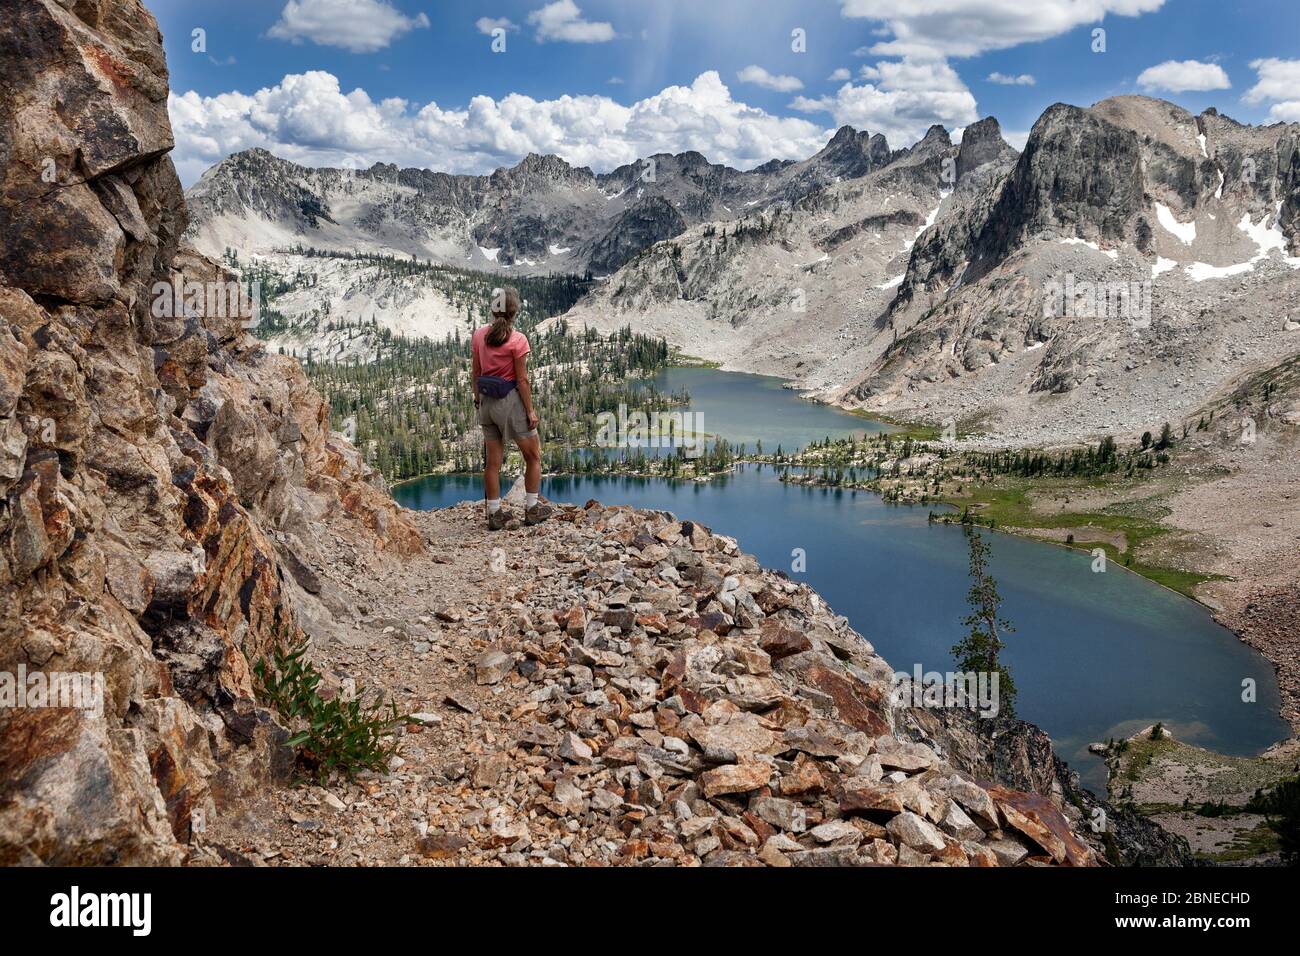 Day hiker on trail above Twin Lakes, Sawtooth Wilderness, Sawtooth National Recreation Area, Idaho, USA. July 2015. Model released. Stock Photo